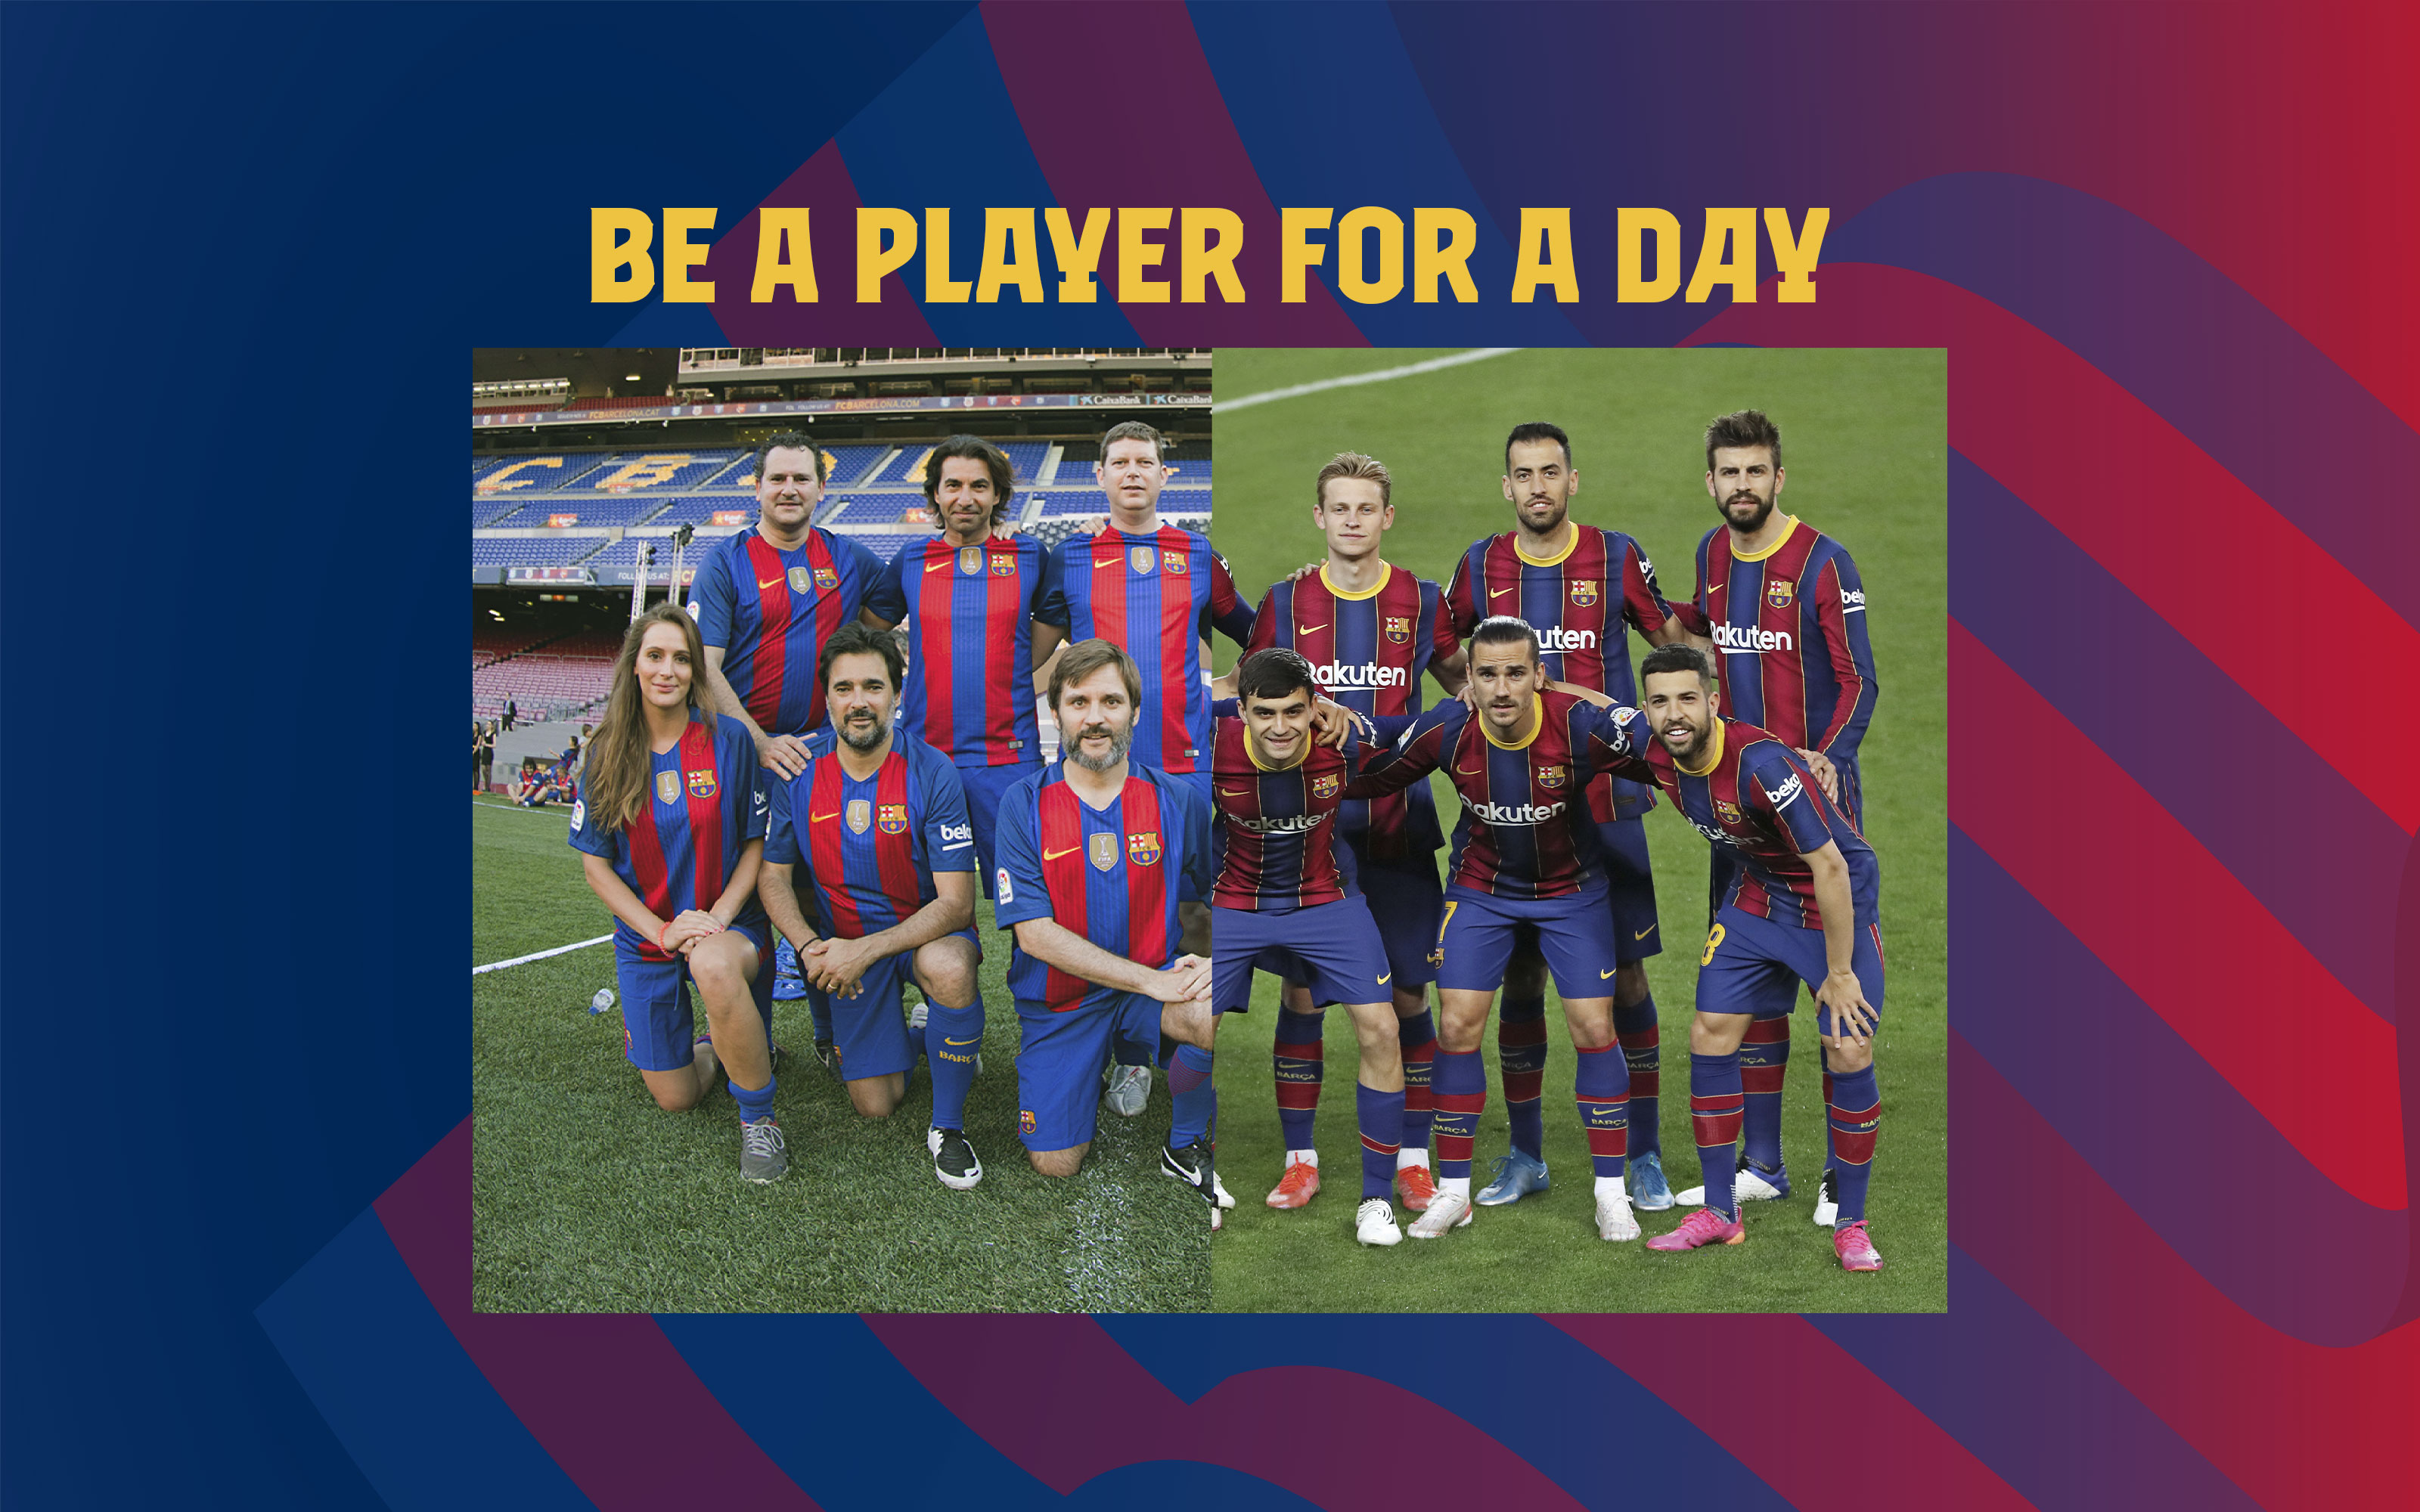 Barça offer the fans the chance for a dream game at Camp Nou